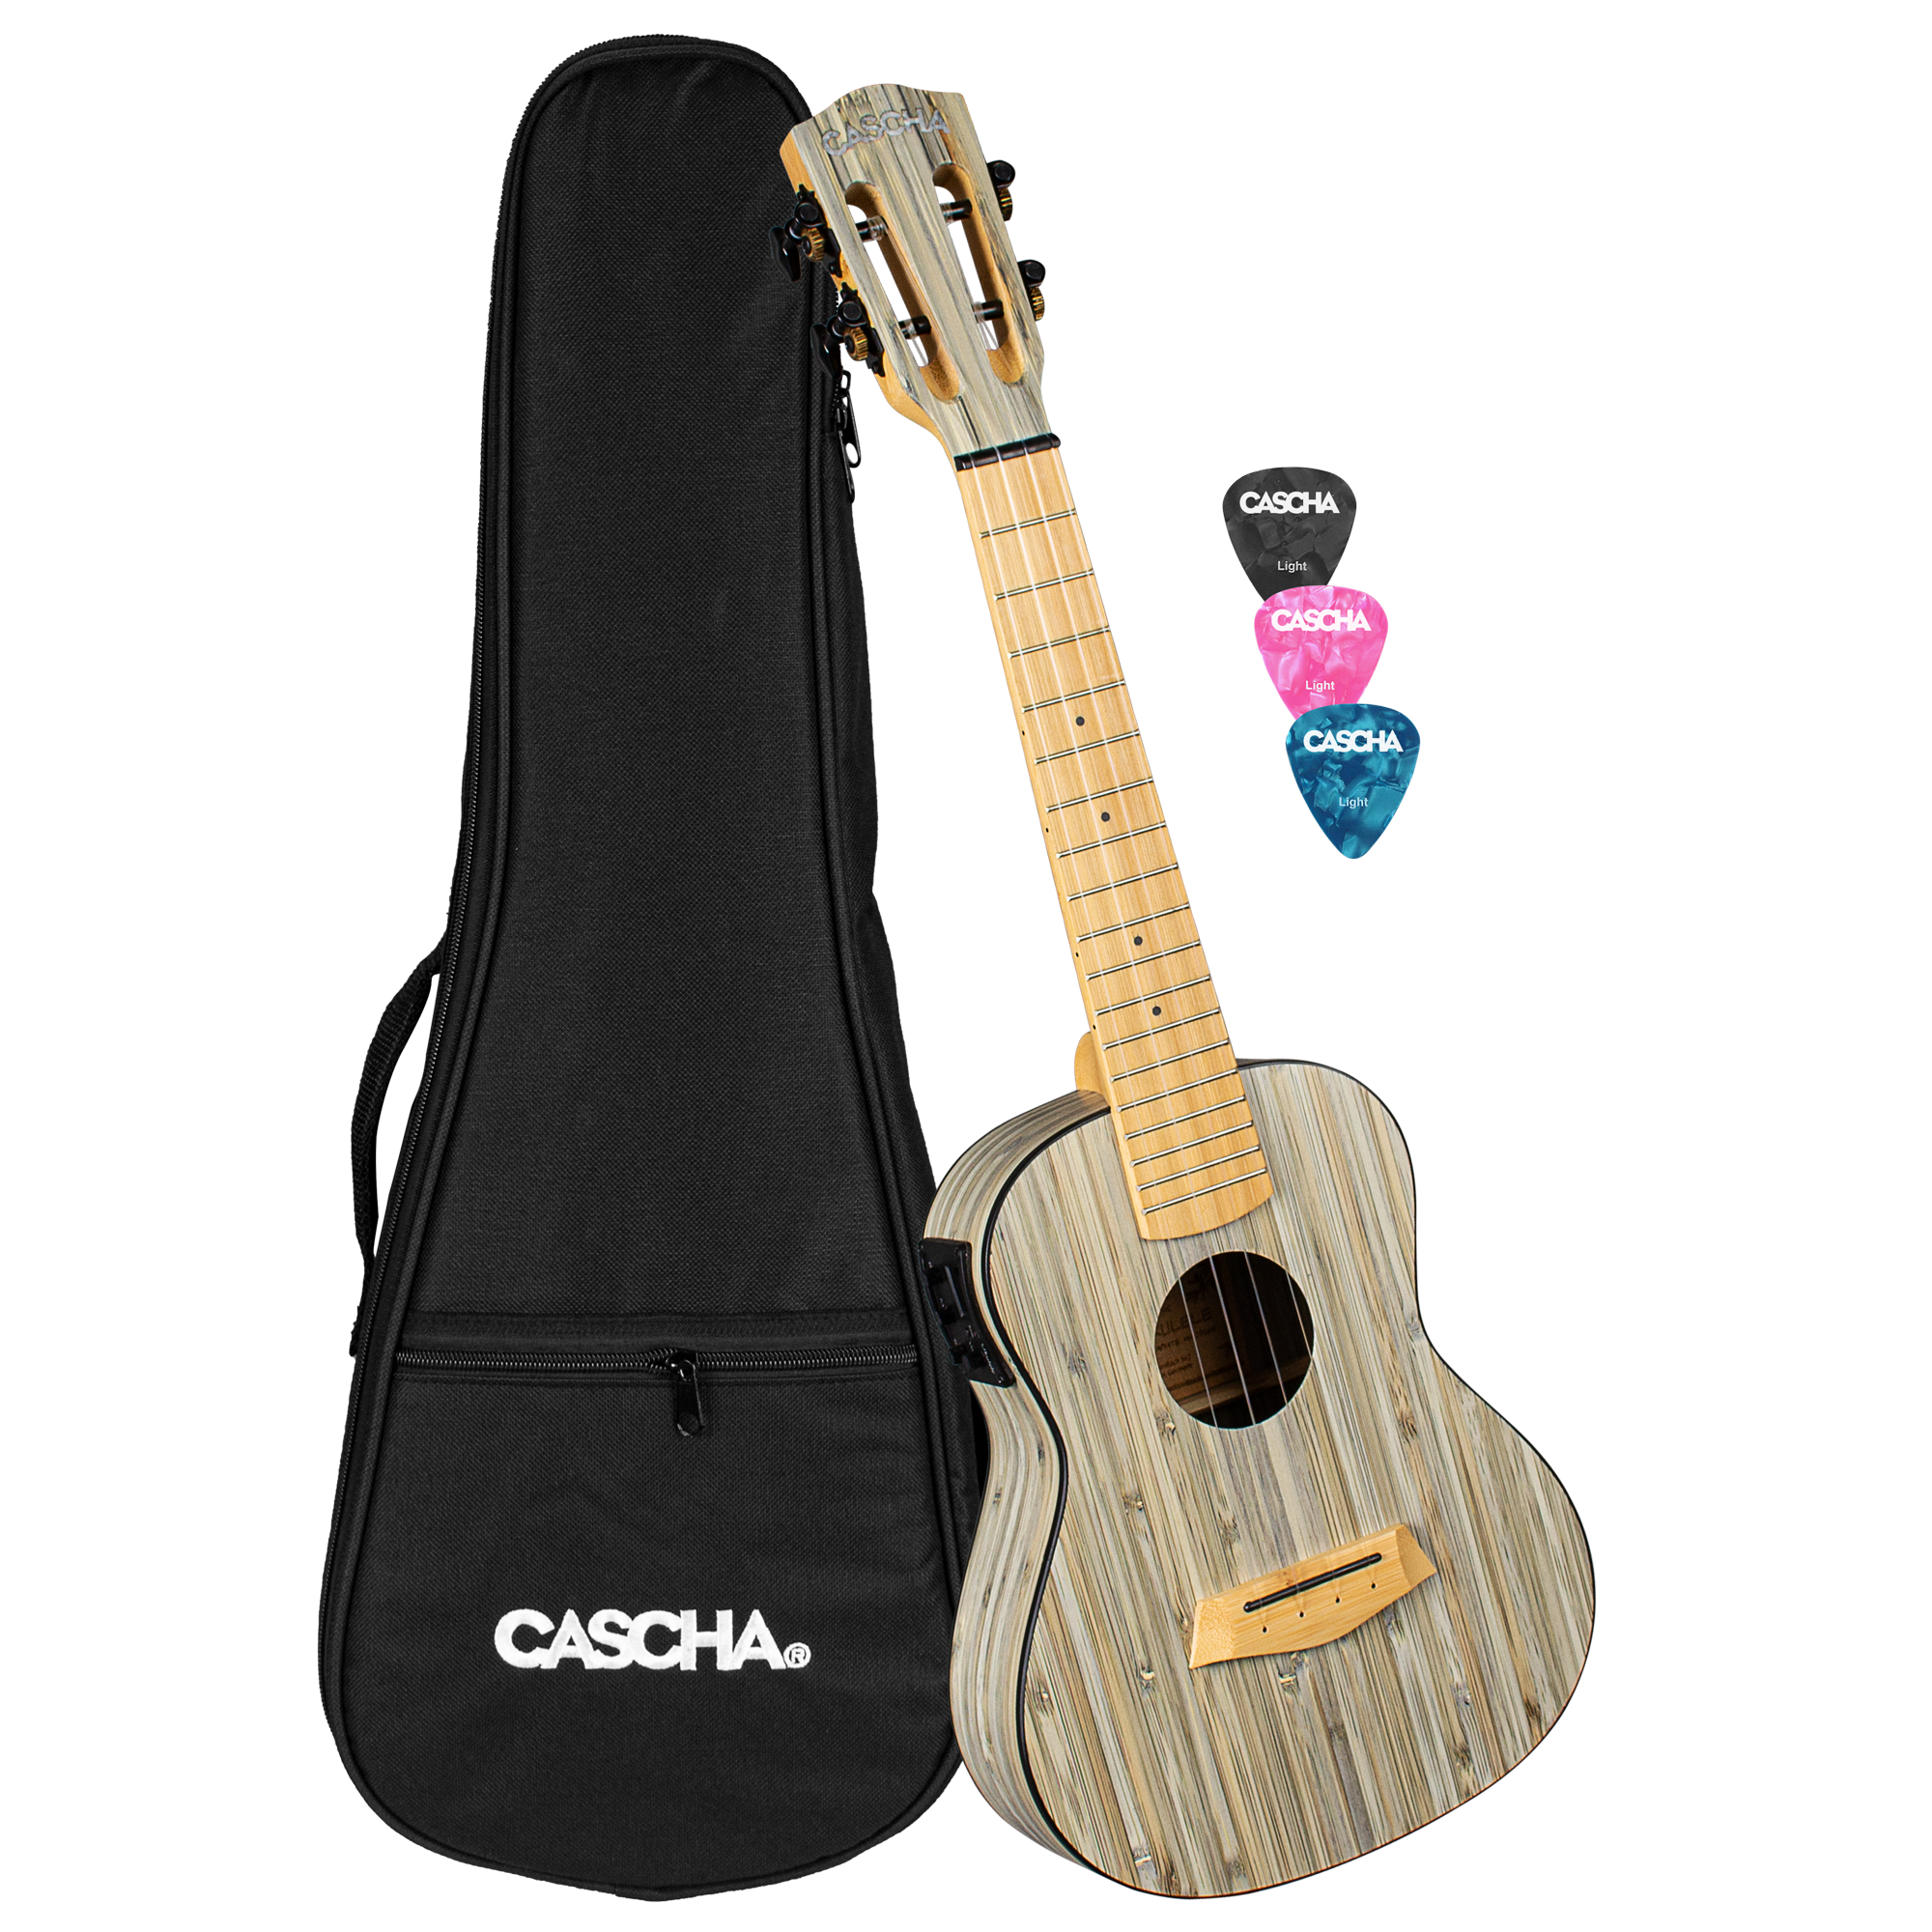 Concert Ukulele Bamboo Graphite with pickup system